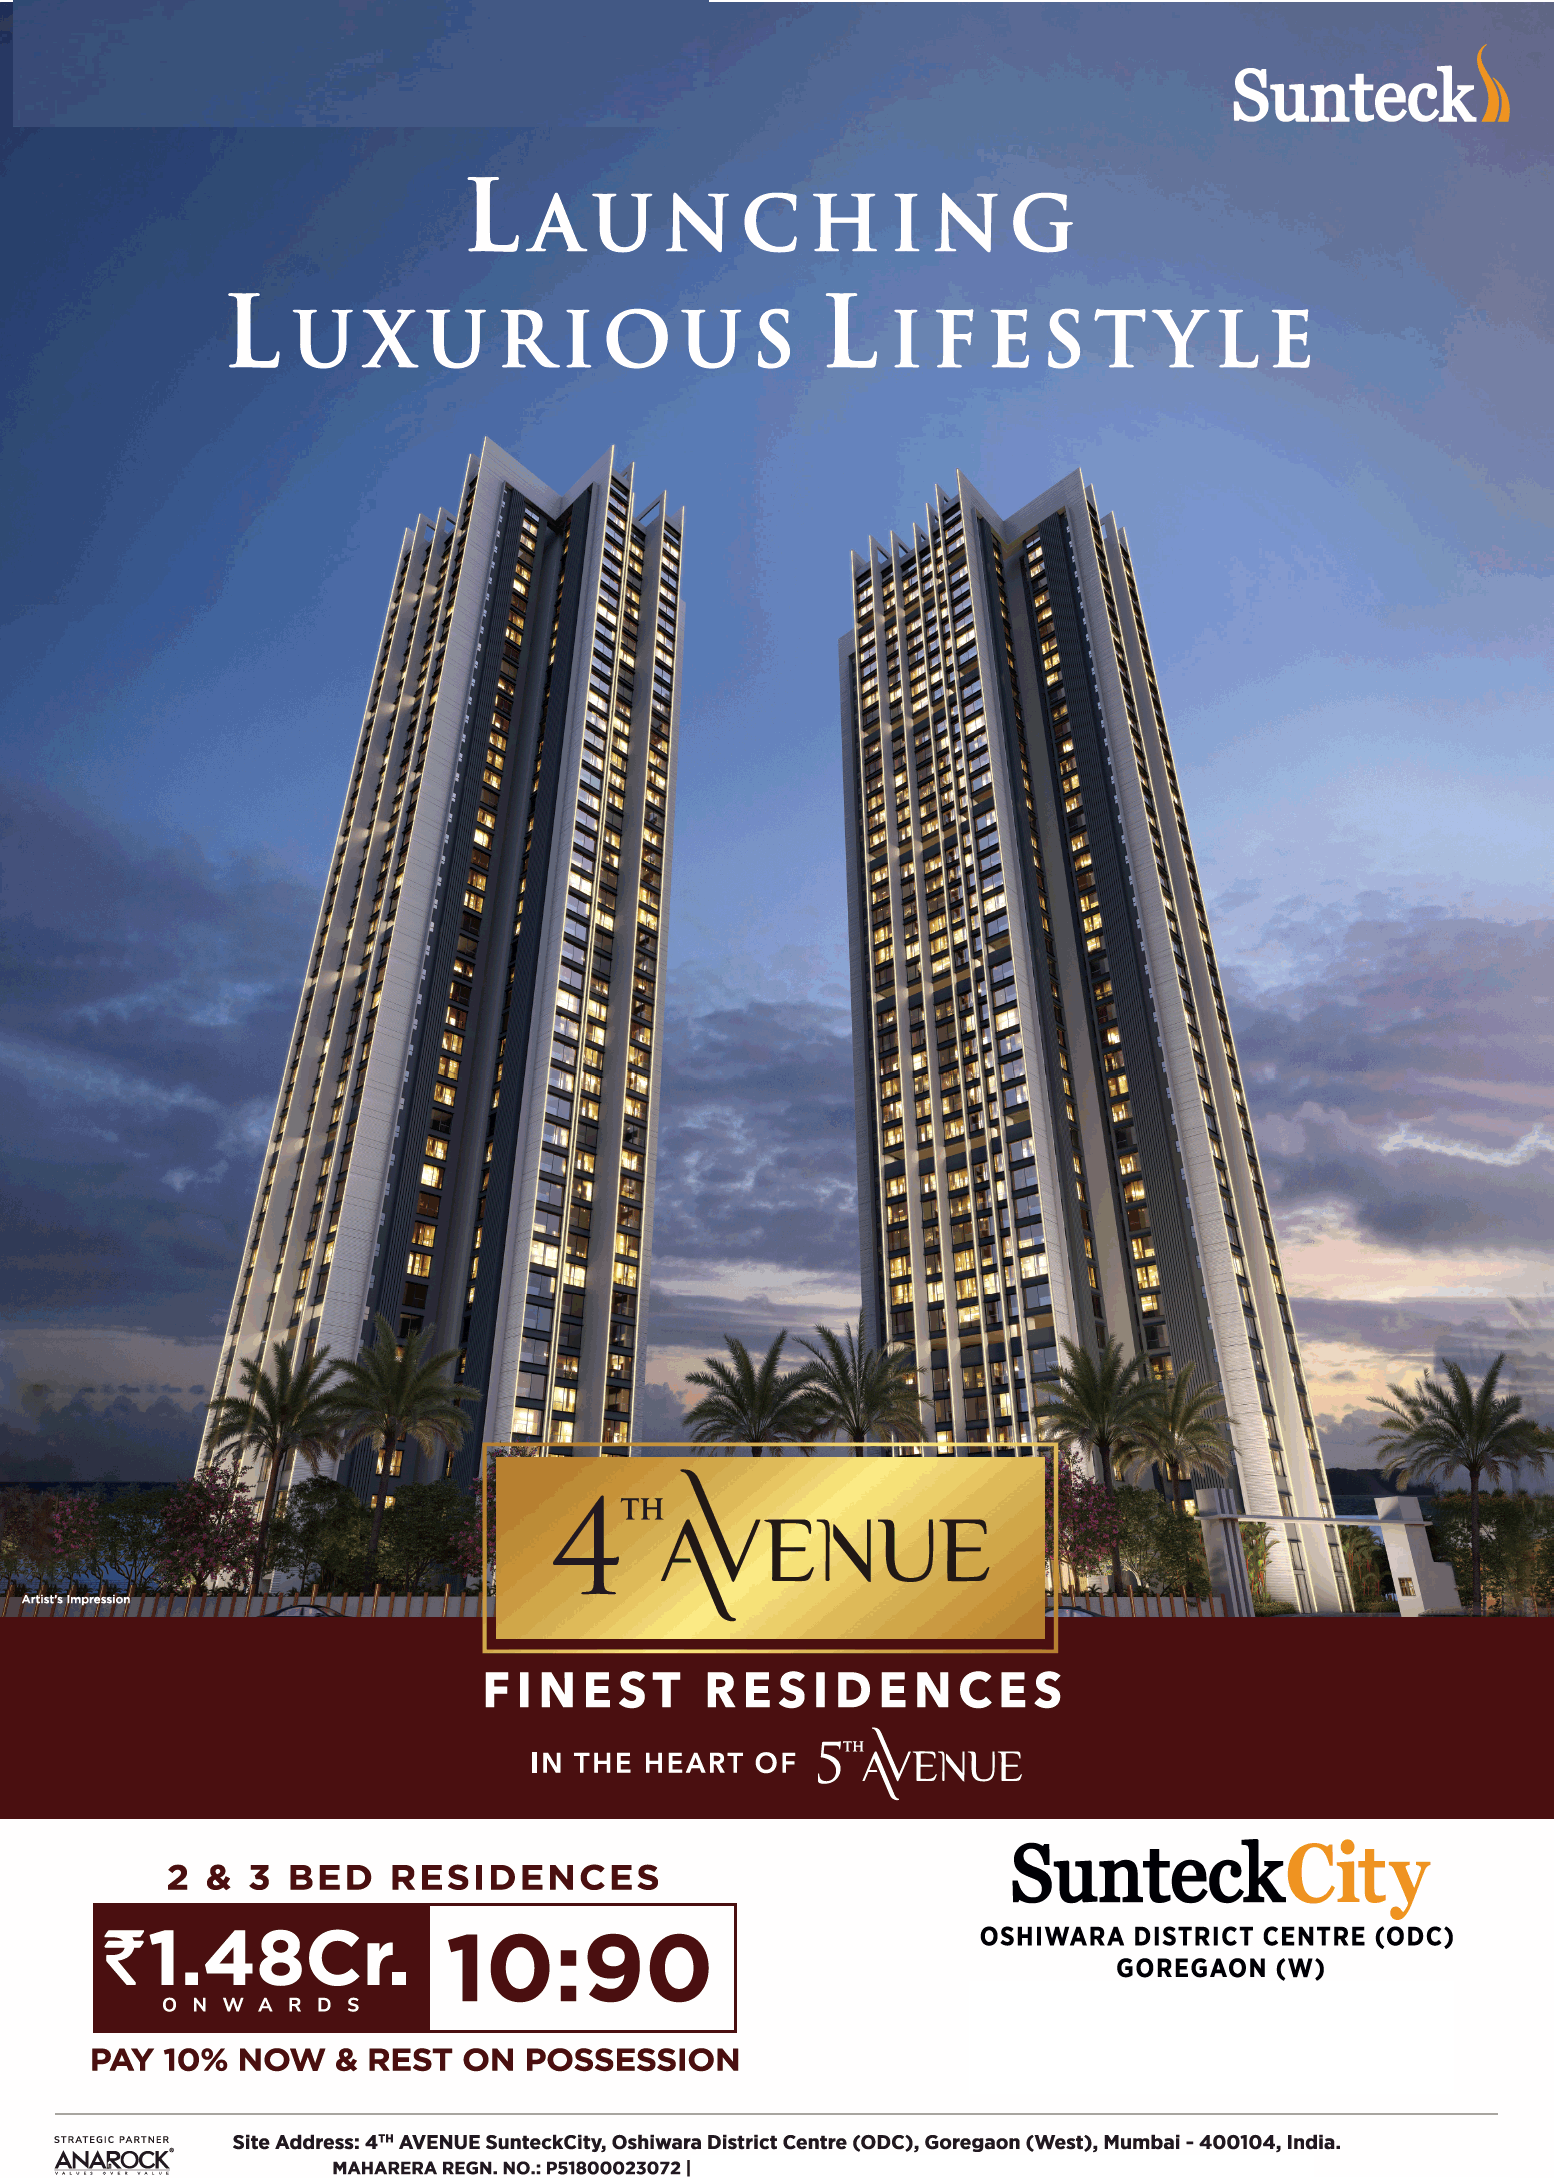 2 and 3-bed residences starting from Rs 1.48 Cr onwards at Sunteck City in Mumbai